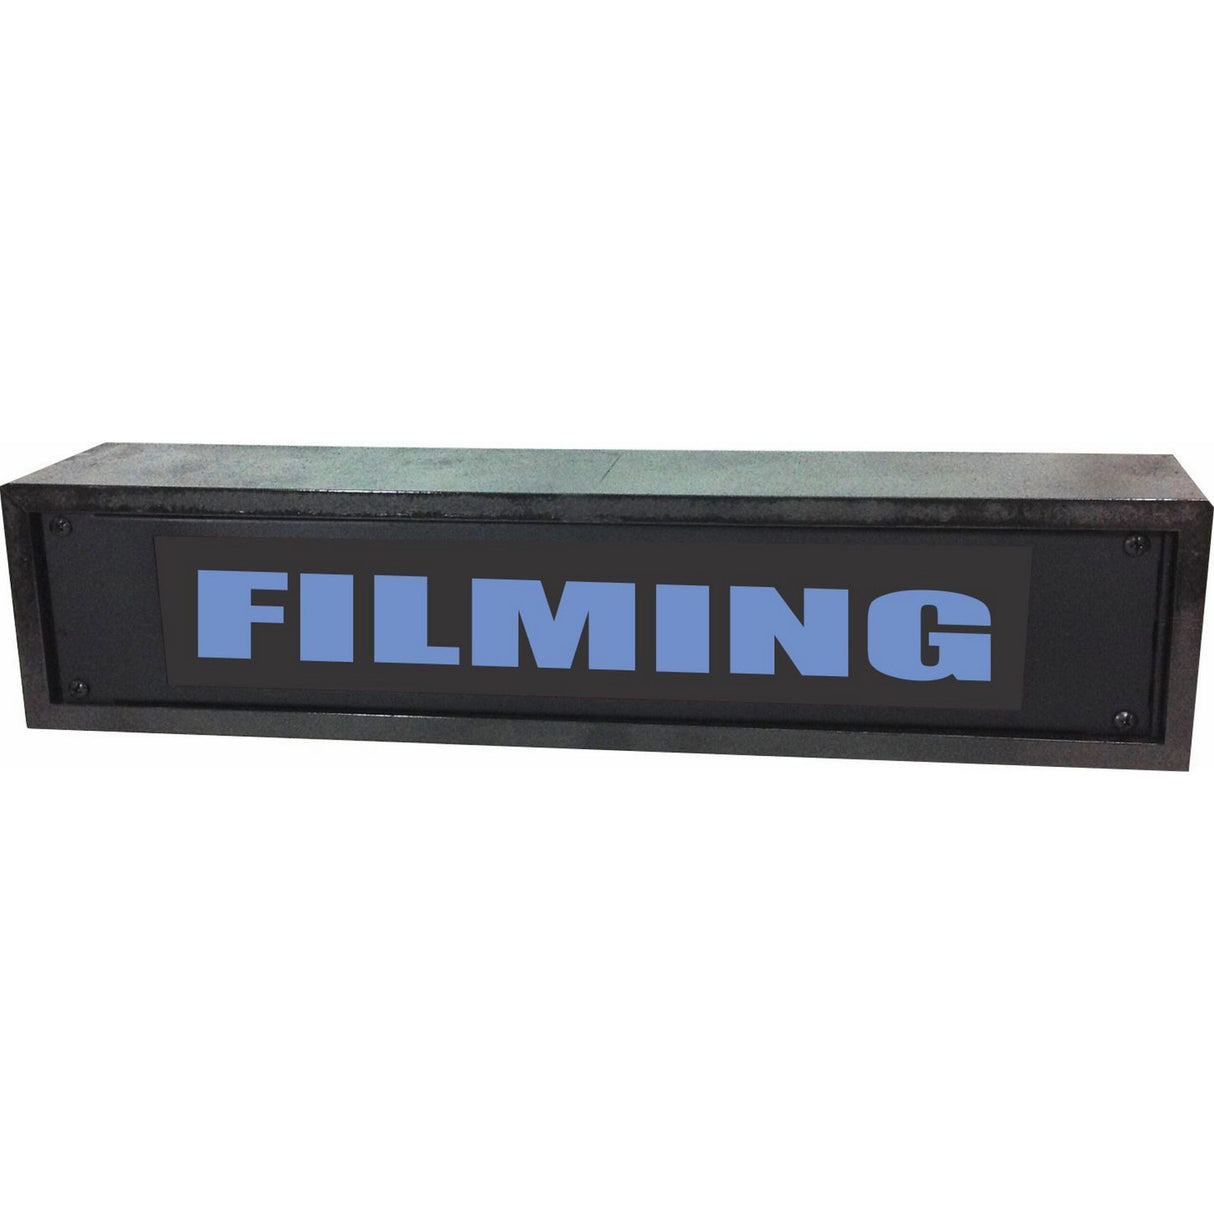 American Recorder OAS-4056BL "FILMING" 2U Rackmount LED Lighted Sign with Enclosure, Blue